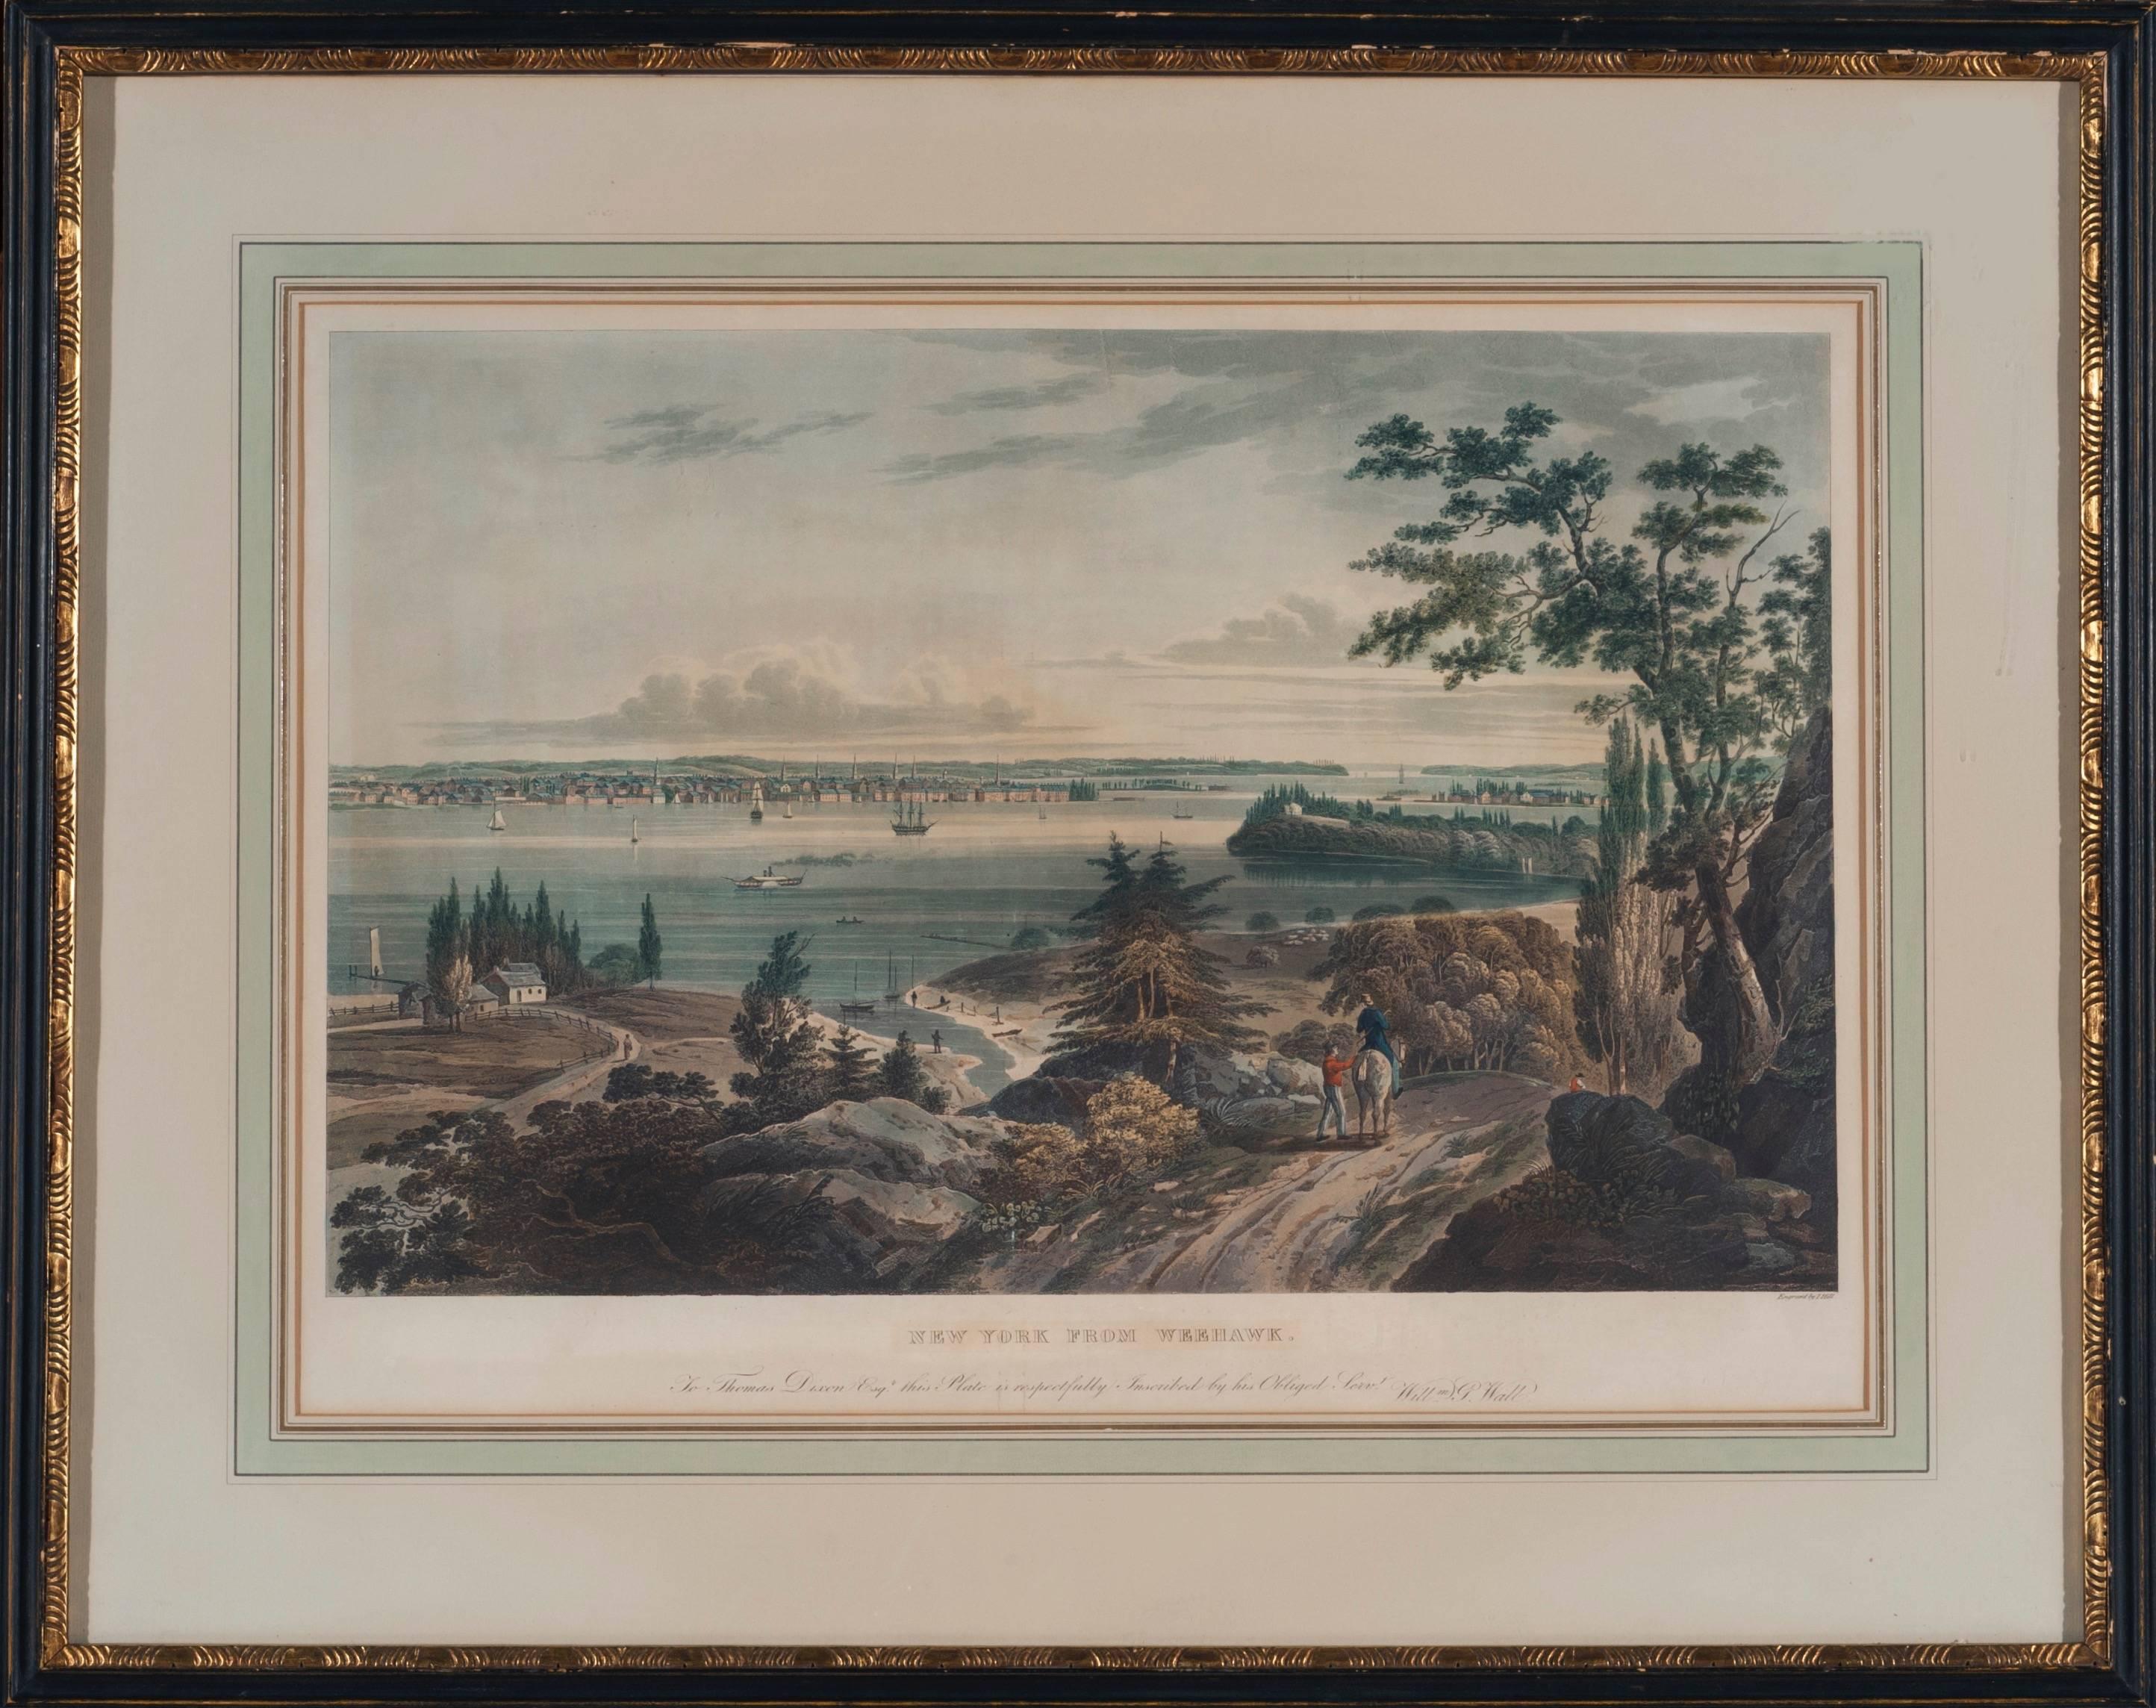 William Guy Wall Landscape Print - New York from Weehawken